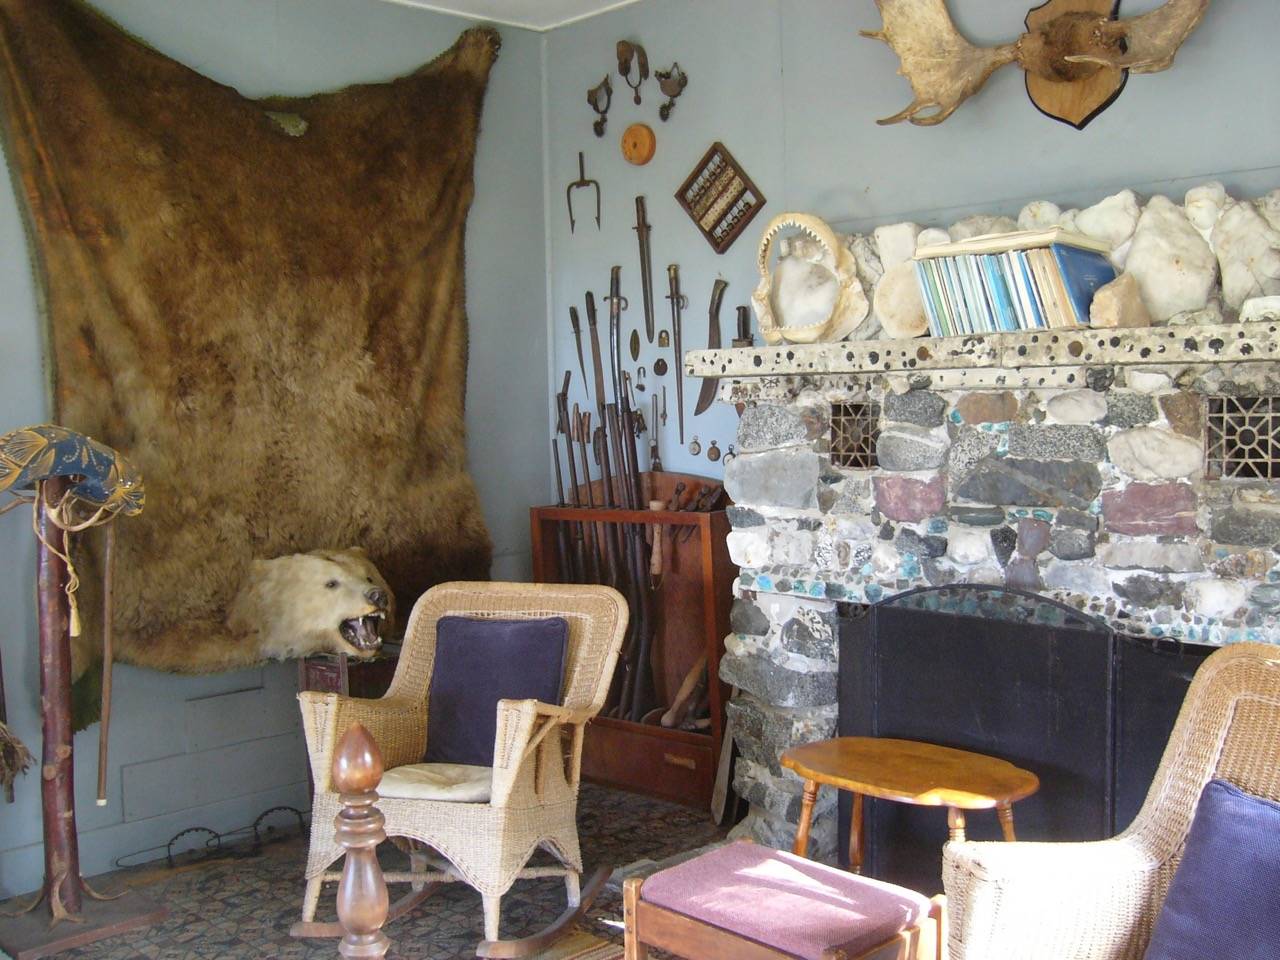 The preserved room at the Ibachs’ homestead filled with memorbilia. Image courtesy of Joel Bennett.